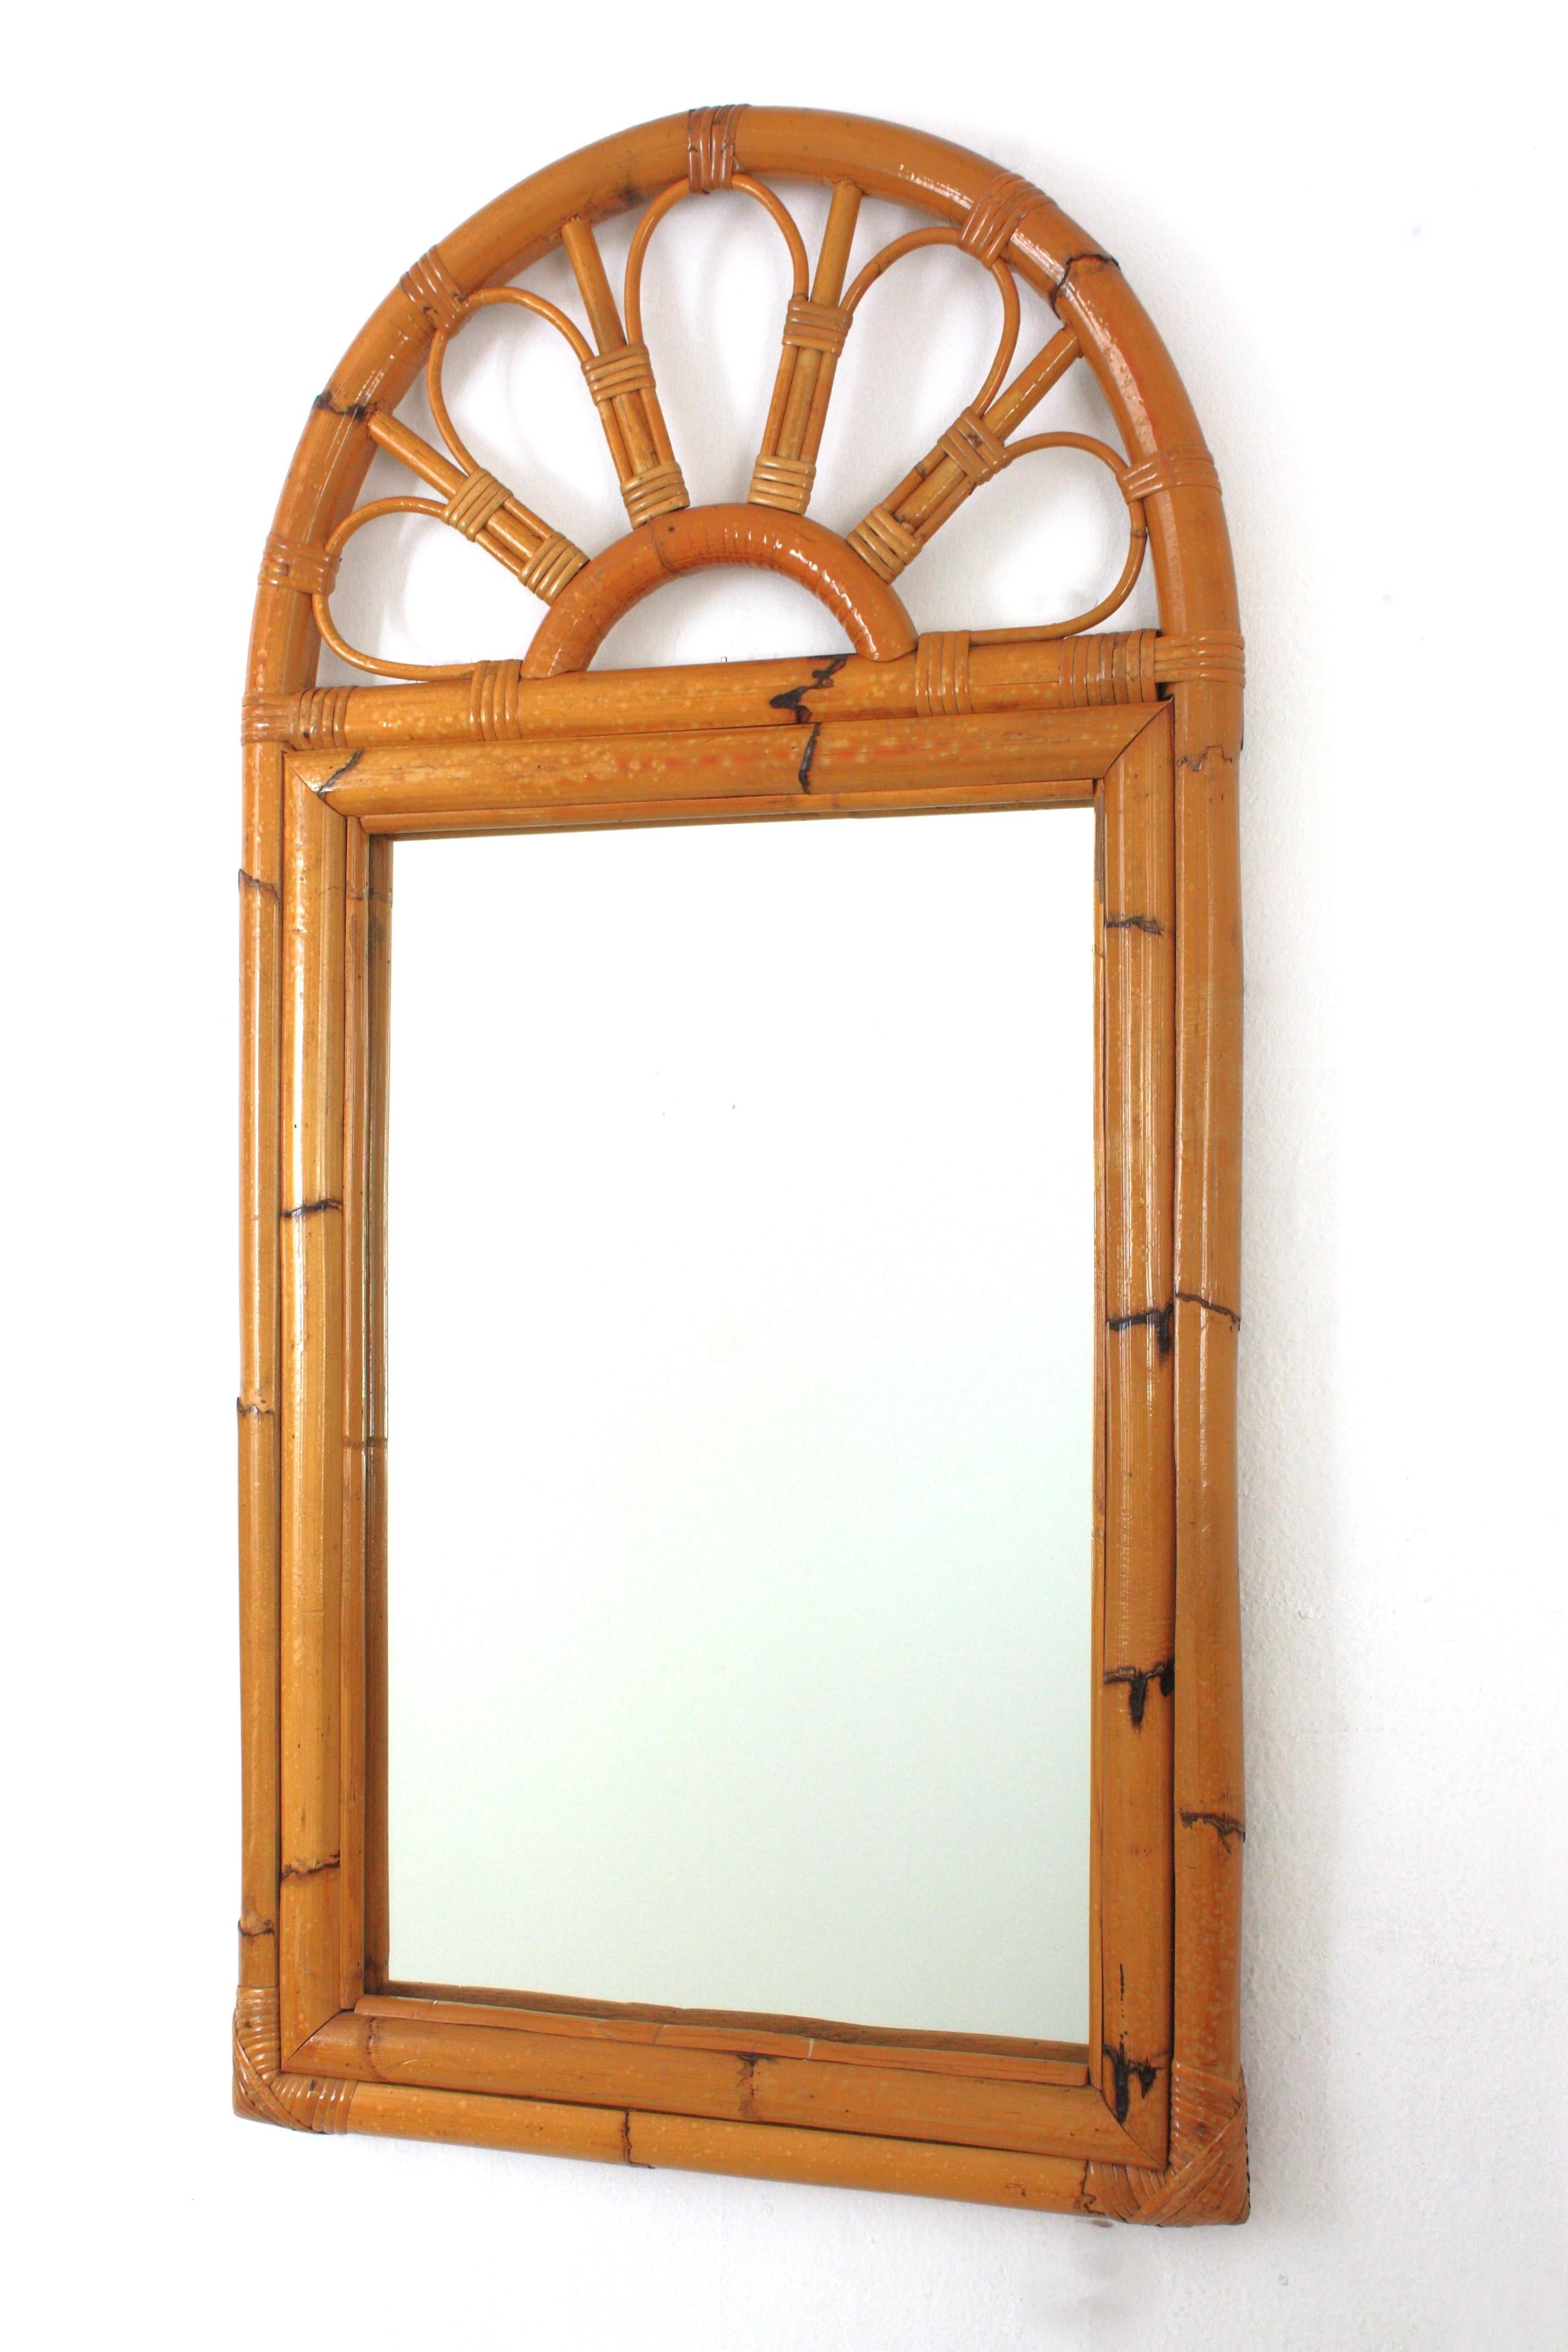 20th Century Mid-Century Rattan Bamboo Arched Wall Mirror  For Sale